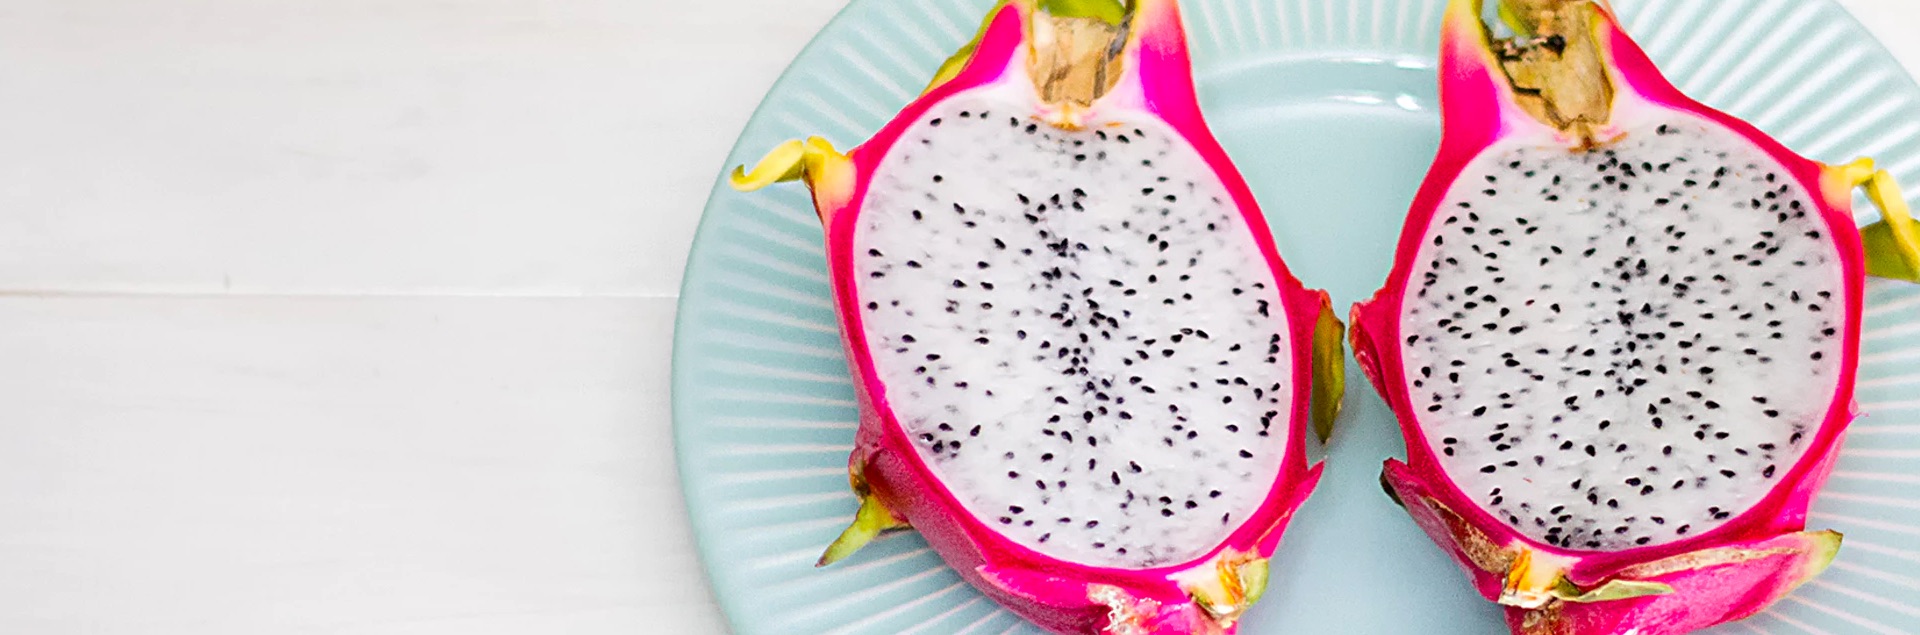 Dragonfruit on a plate cut in half